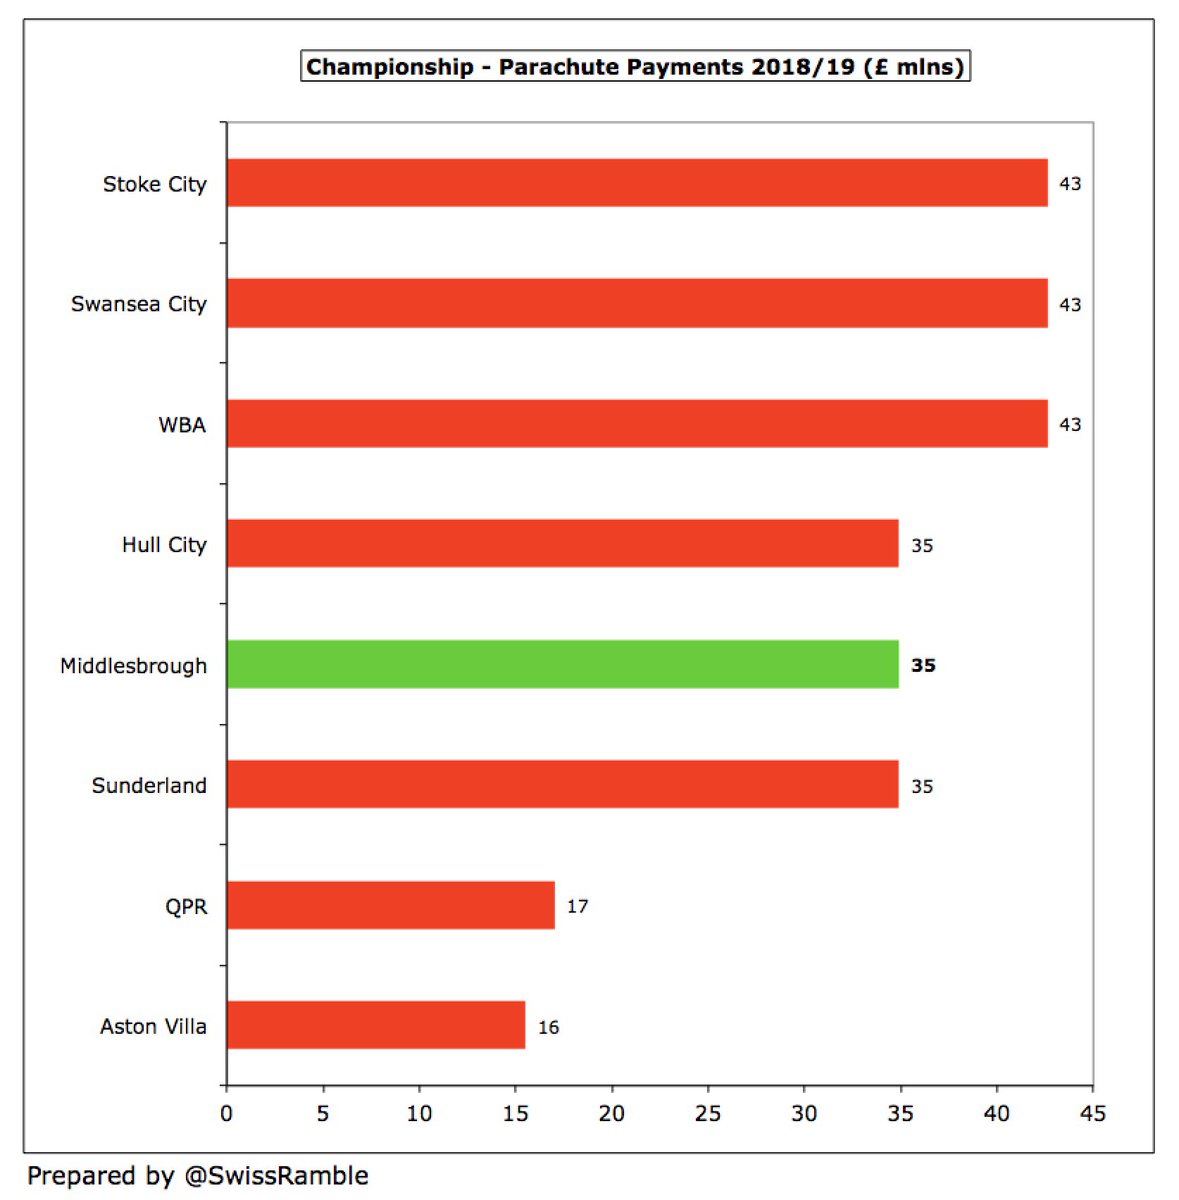 Championship revenue is hugely influenced by Premier League parachute payments, though  #Boro’s fell from £42m to £35m in 2018/19, the same as  #HCAFC and  #SAFC. The three newly relegated clubs (Stoke City, Swansea City and WBA) got £42m, QPR £17m and  #AVFC £15m.